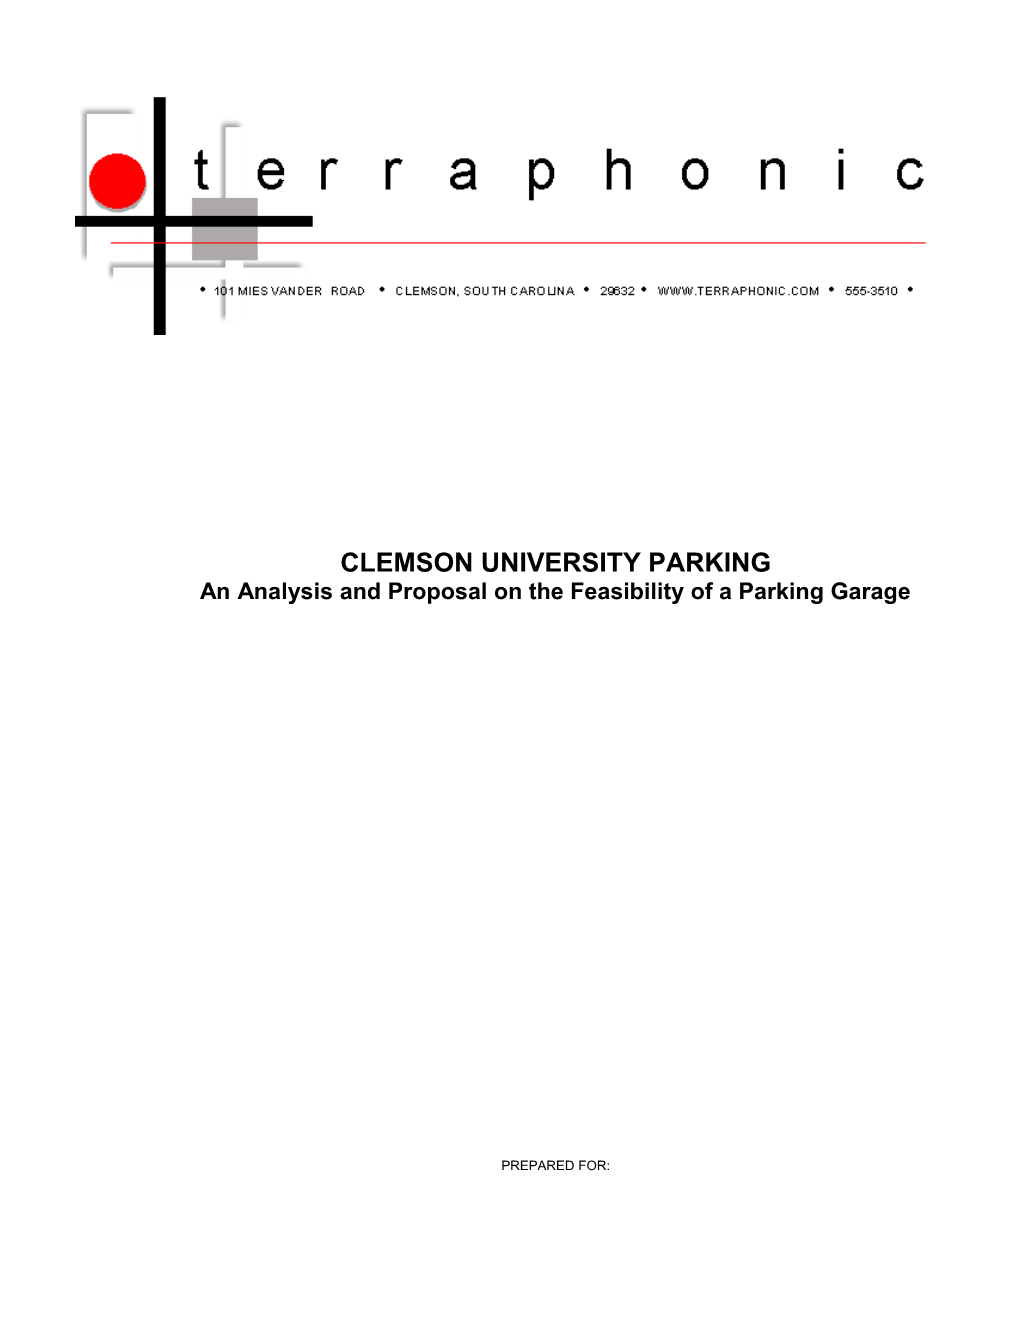 An Analysis and Proposal on the Feasibility of a Parking Garage